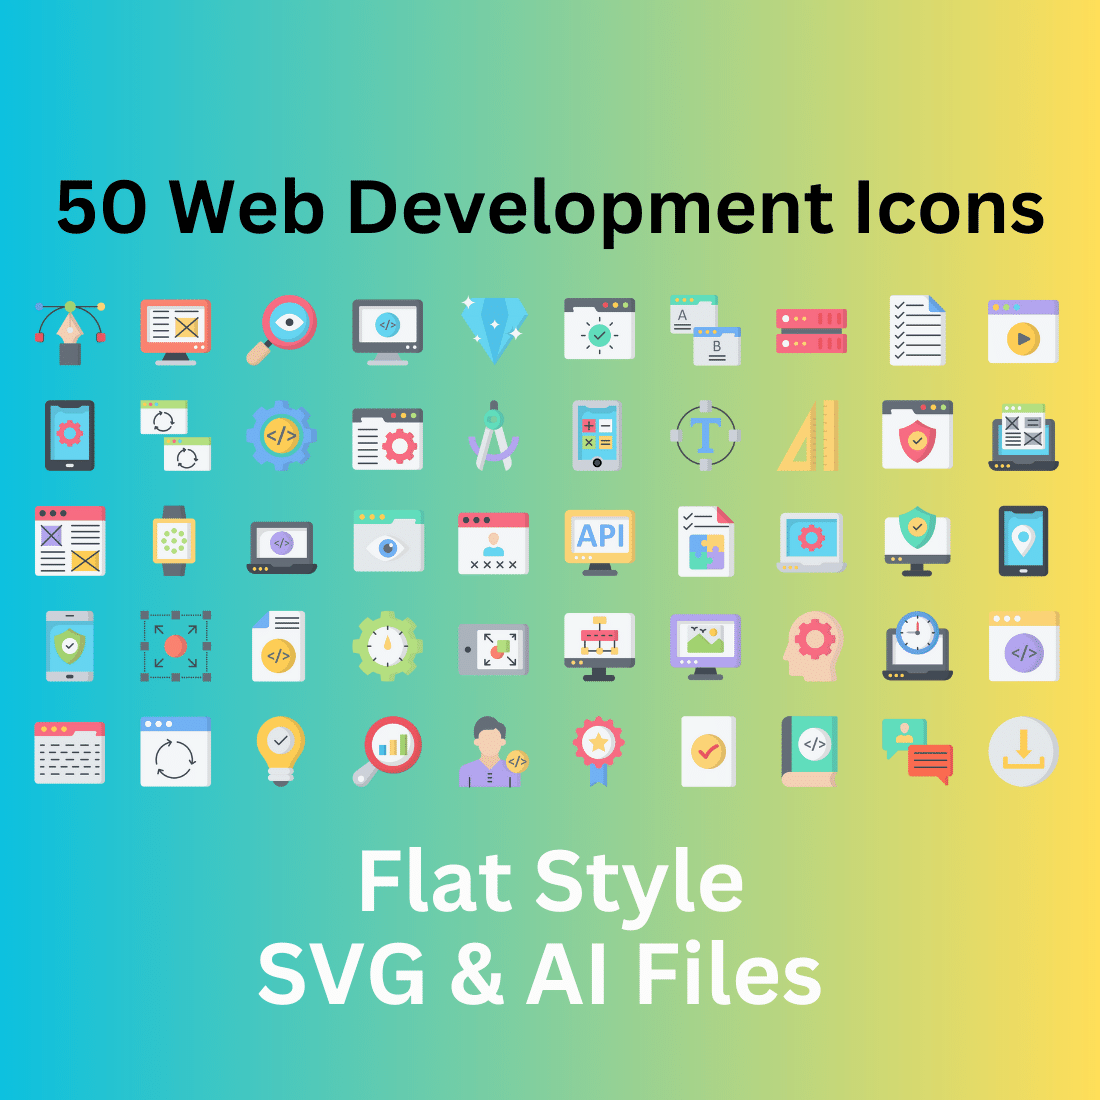 Web Development Icon Set 50 Flat Icons - SVG And AI Files cover image.